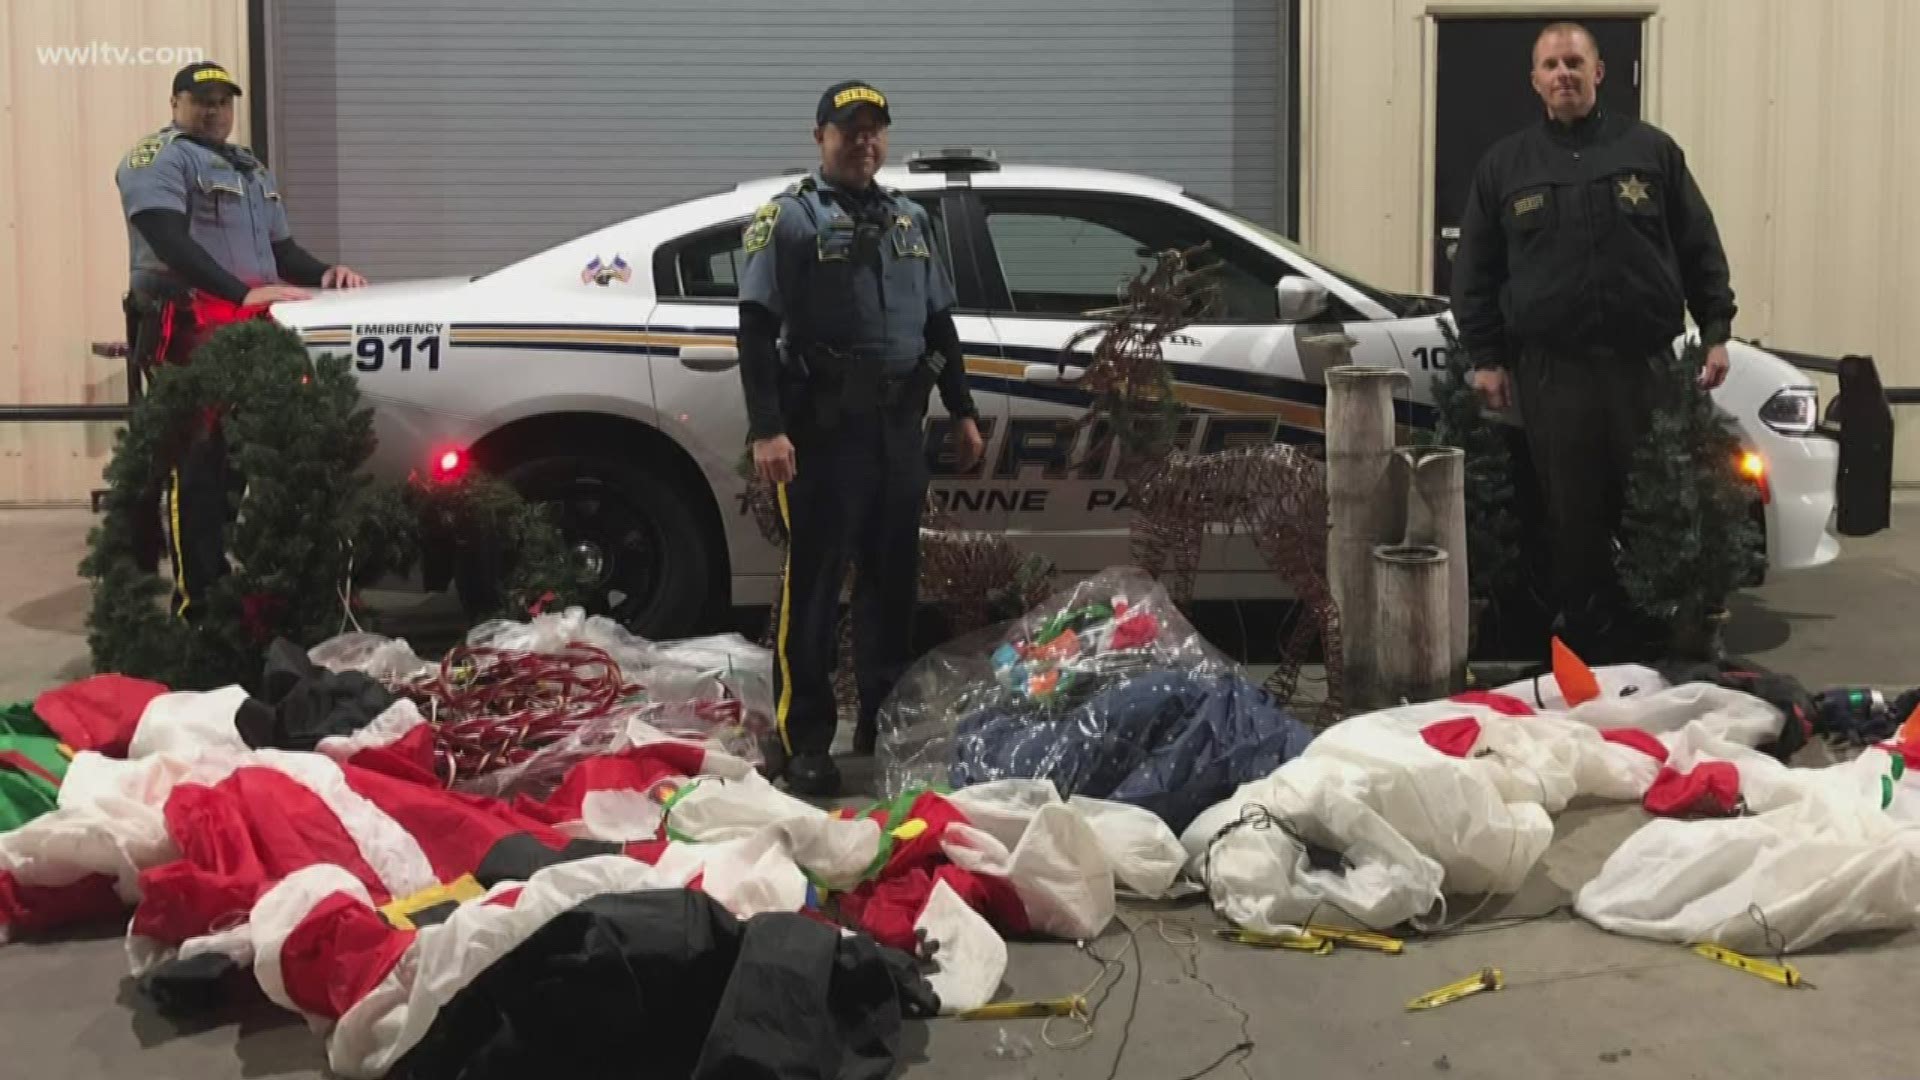 According to Terrebonne Parish Sheriff's Office officials, 31-year-old Nikkita Raquel Terrebonne swiped multiple holiday decorations from homes around Houma.